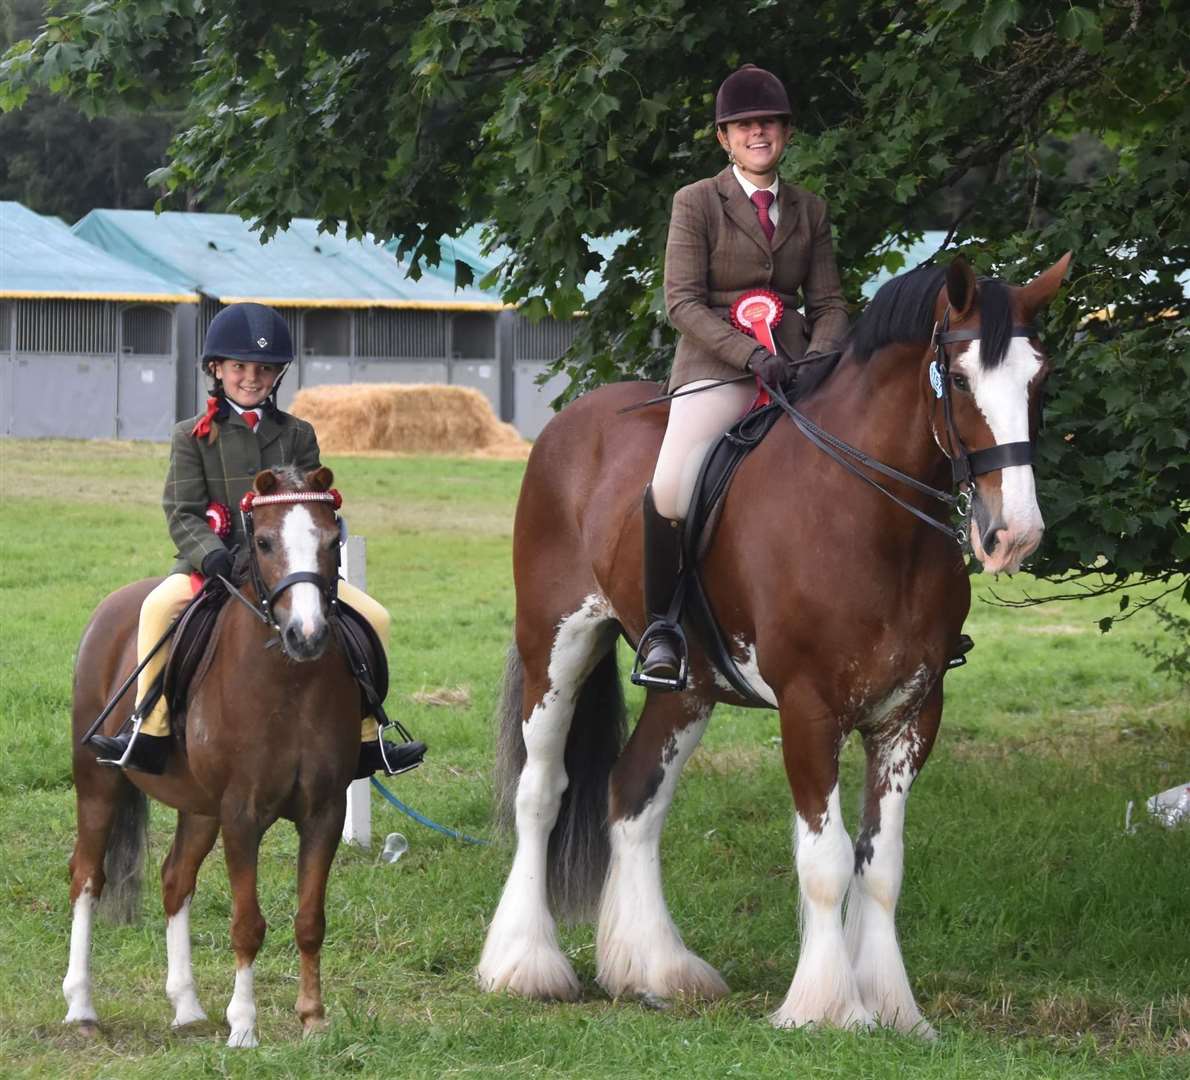 Lilly and Ted, Sam and Bulwark Bay reunite at this year's Land Rover Blair Castle International Horse Trials, in Perthshire.